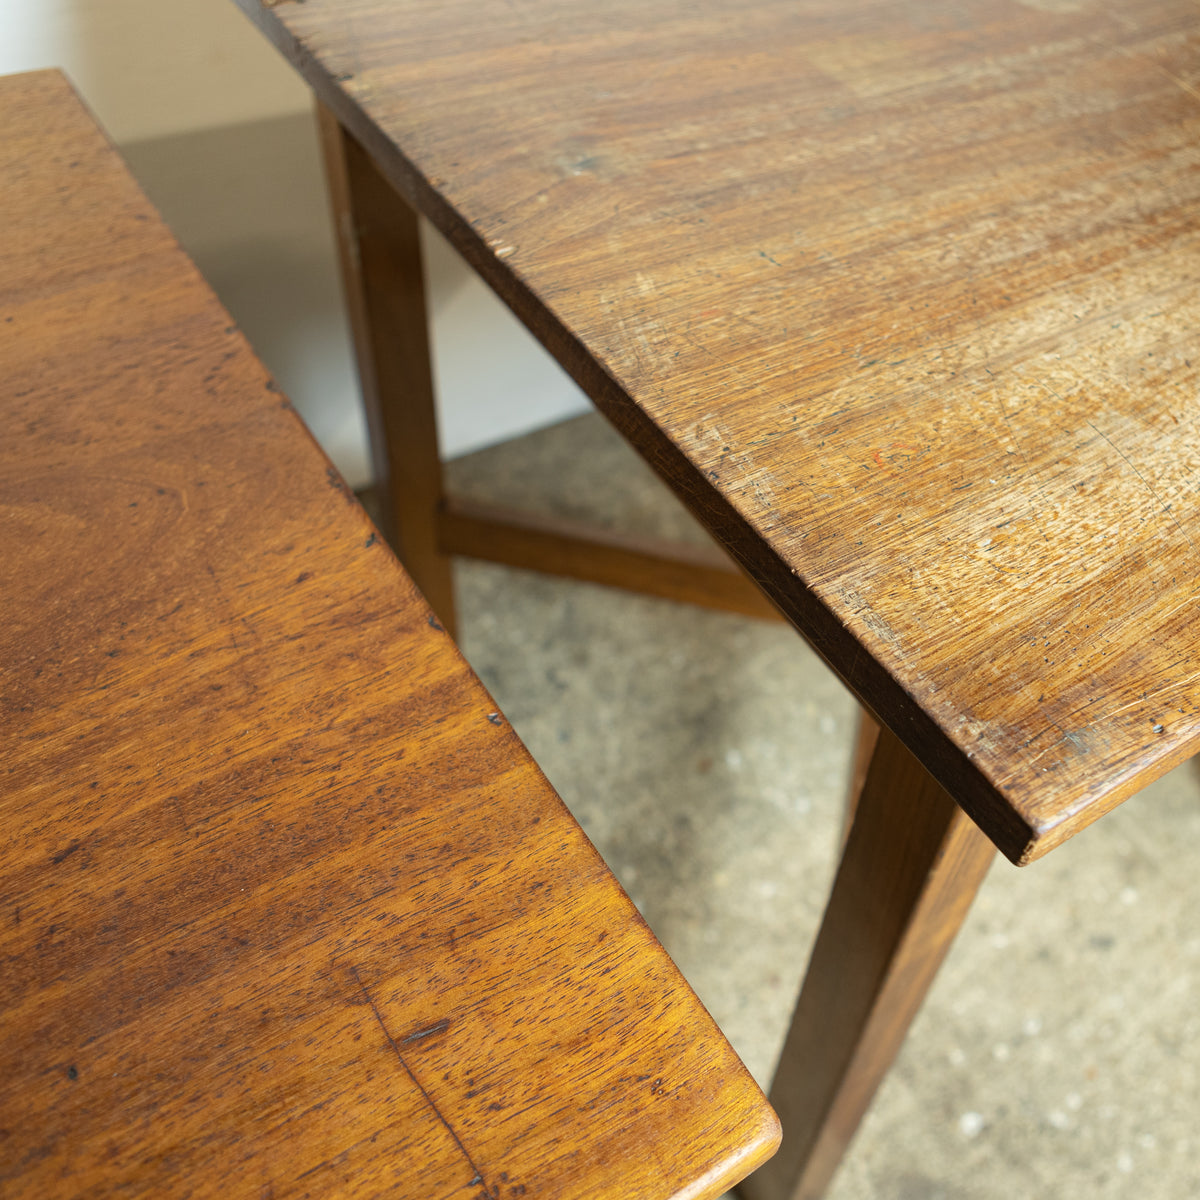 Reclaimed Vintage Solid Teak Square Tables | Desks with Drawer (many available) | The Architectural Forum